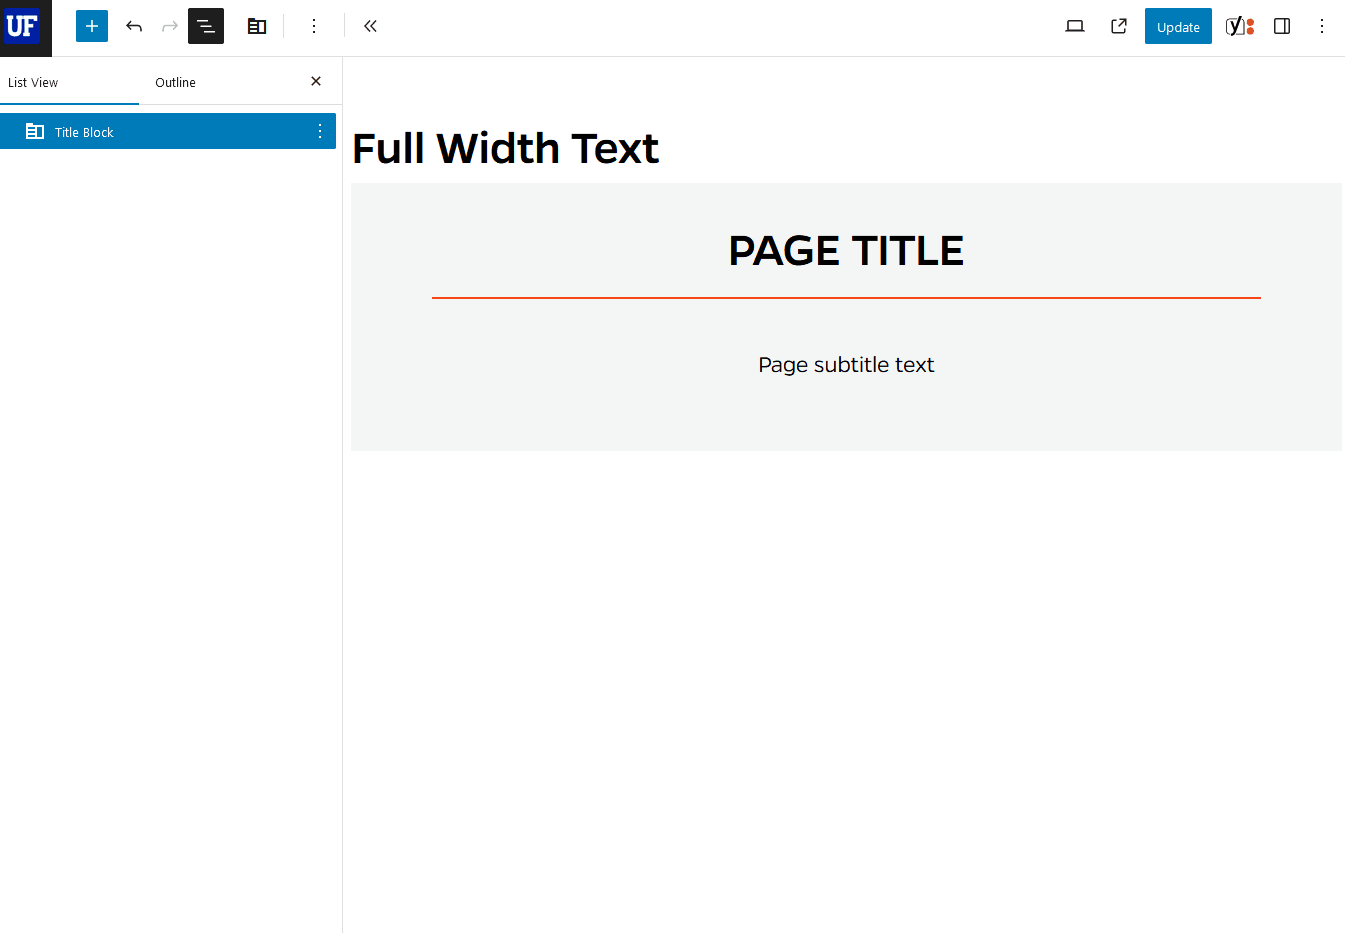 How to insert a full width text block in Mercury